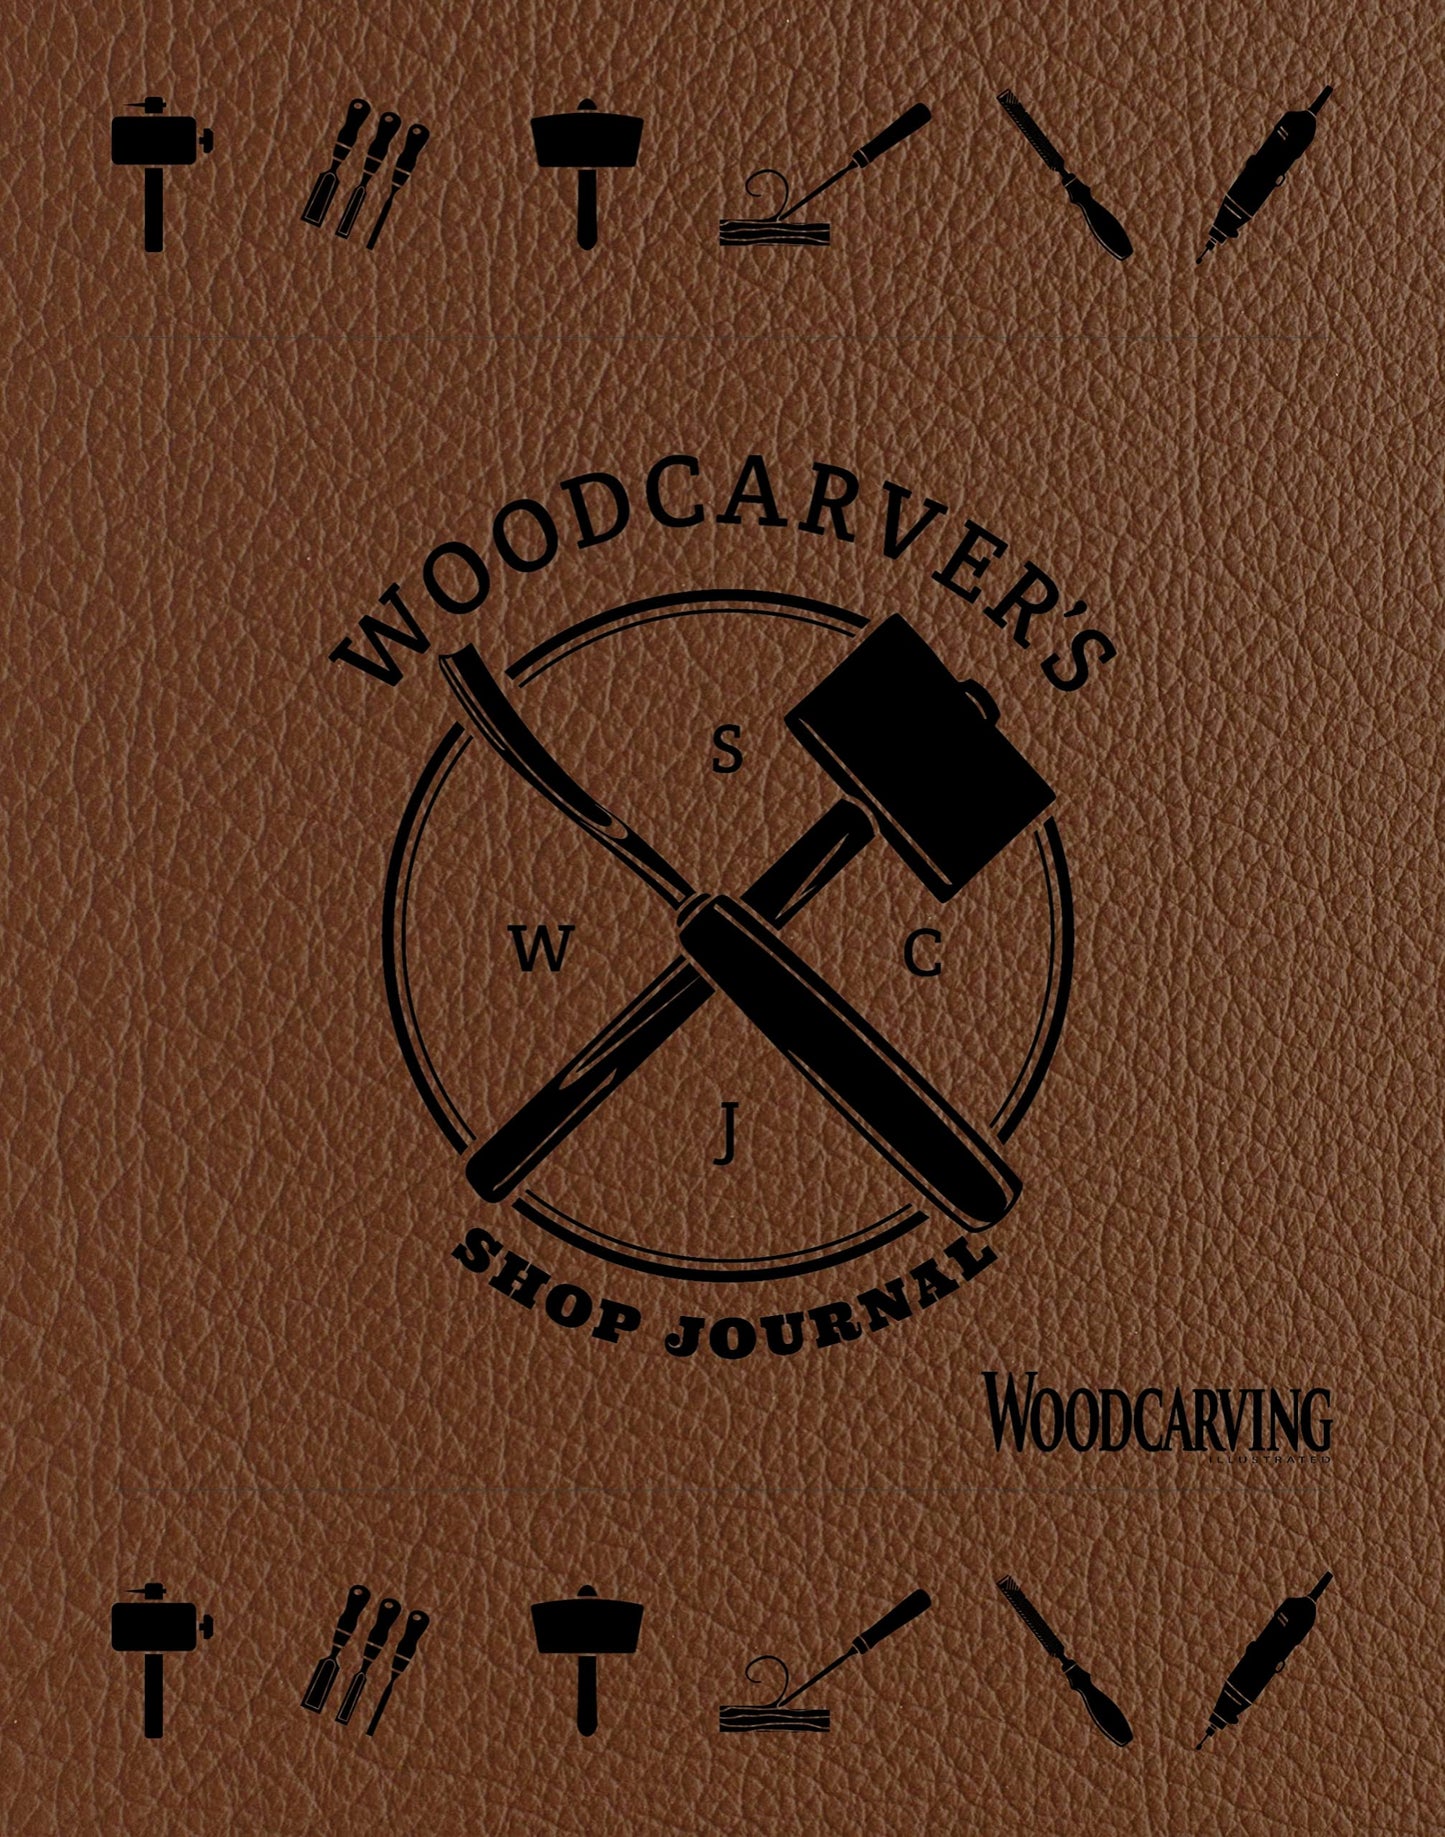 Woodcarver's Shop Journal (Quiet Fox Designs) Log & Organize Your Woodcarving Projects, Sketches, Patterns, Tools, & Material Lists; Includes Handy